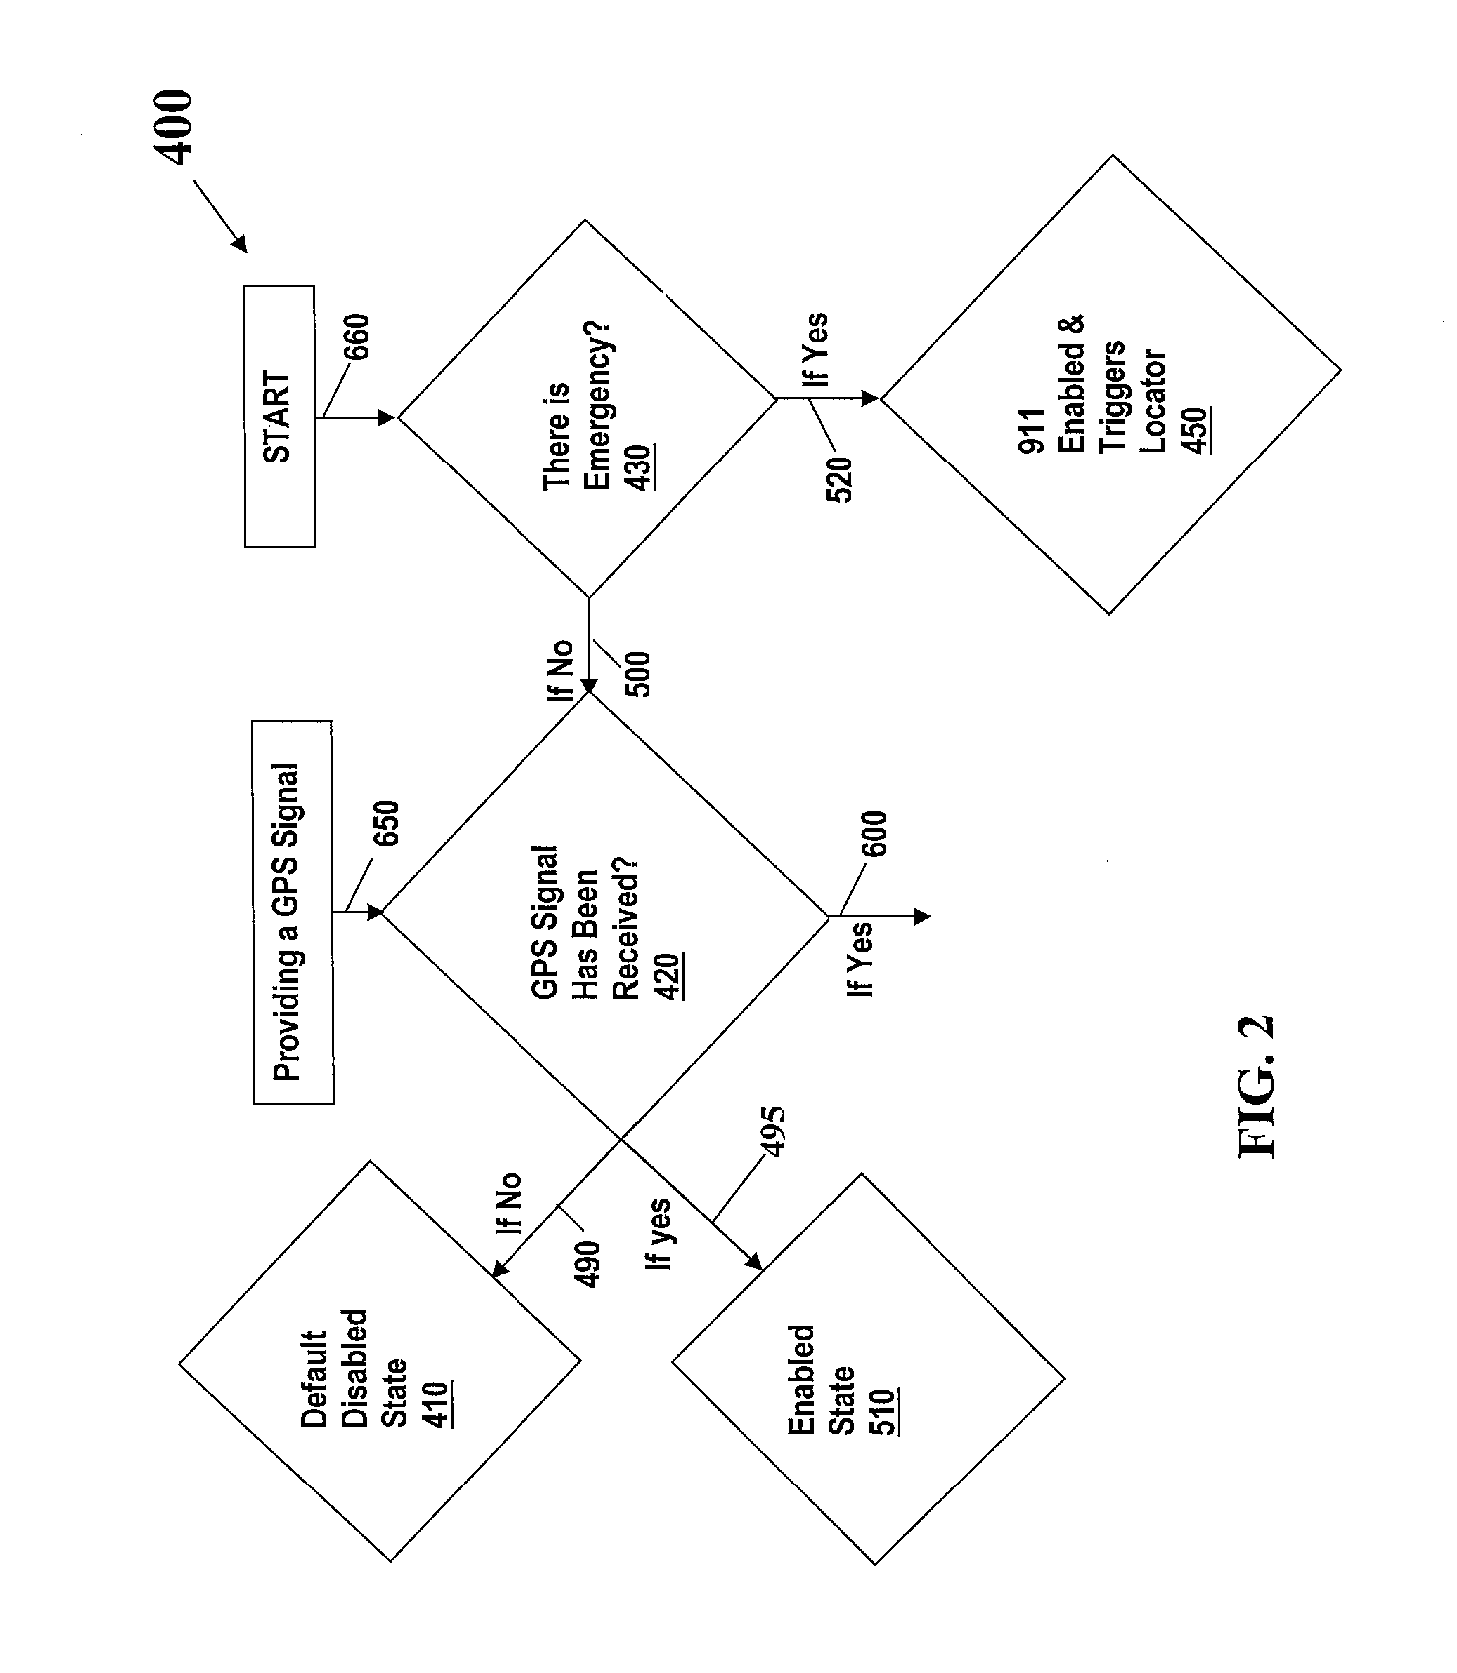 Apparatus For Enabling A Mobile Communicator and Methods of Using the Same